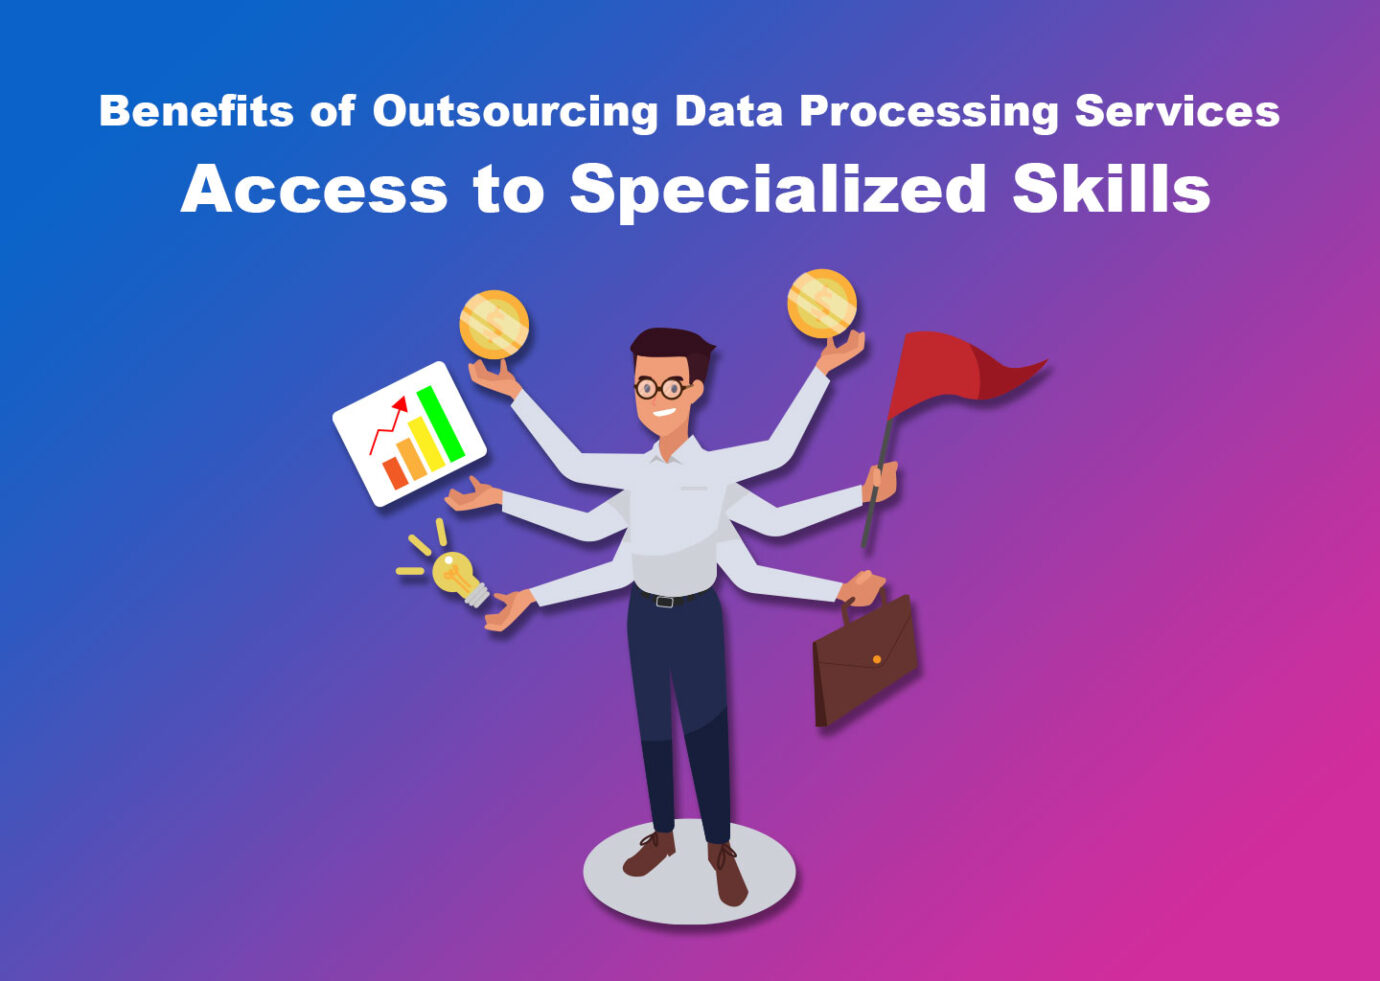 Benefits of Outsourcing Data Entry and Processing Services